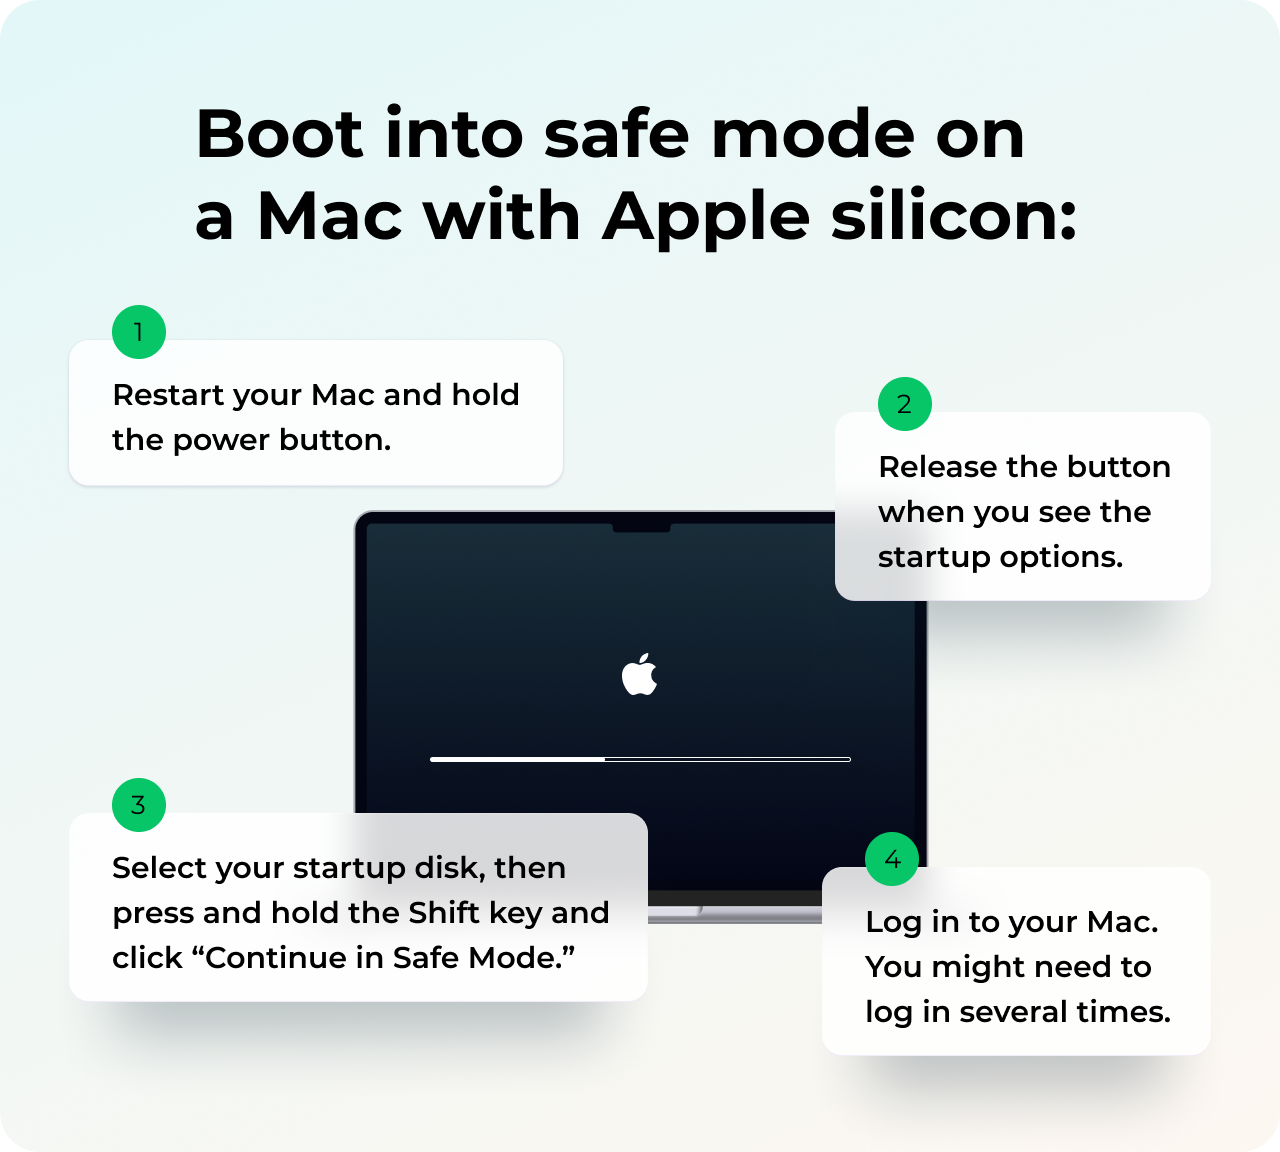 Boot your Mac into safe mode